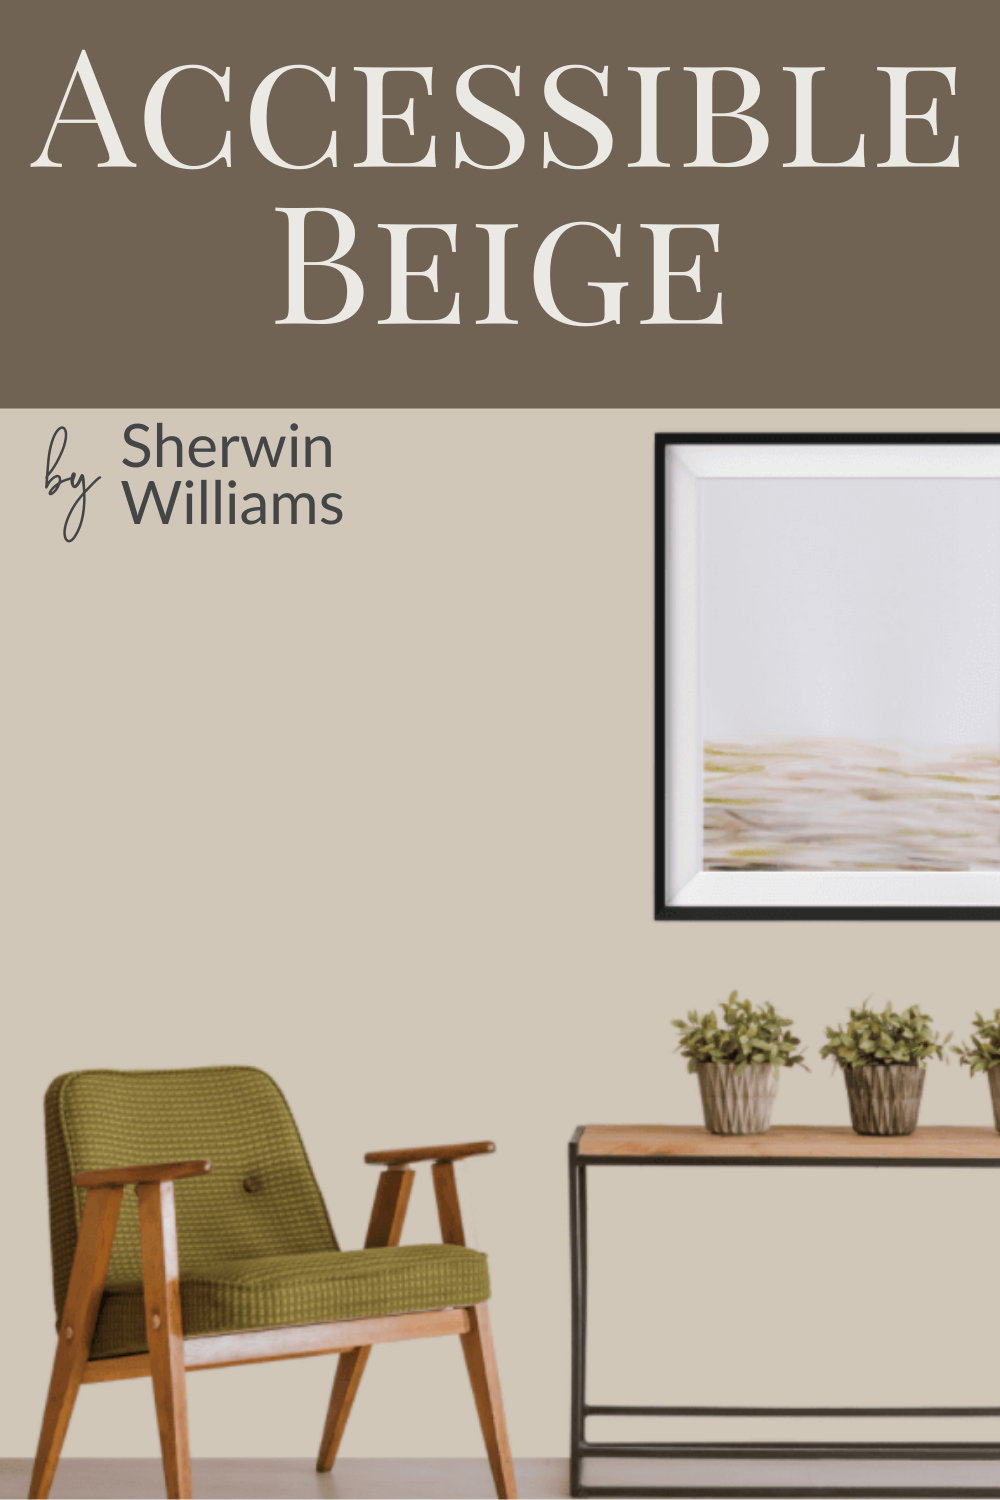 Accessible Beige, Sherwin Williams